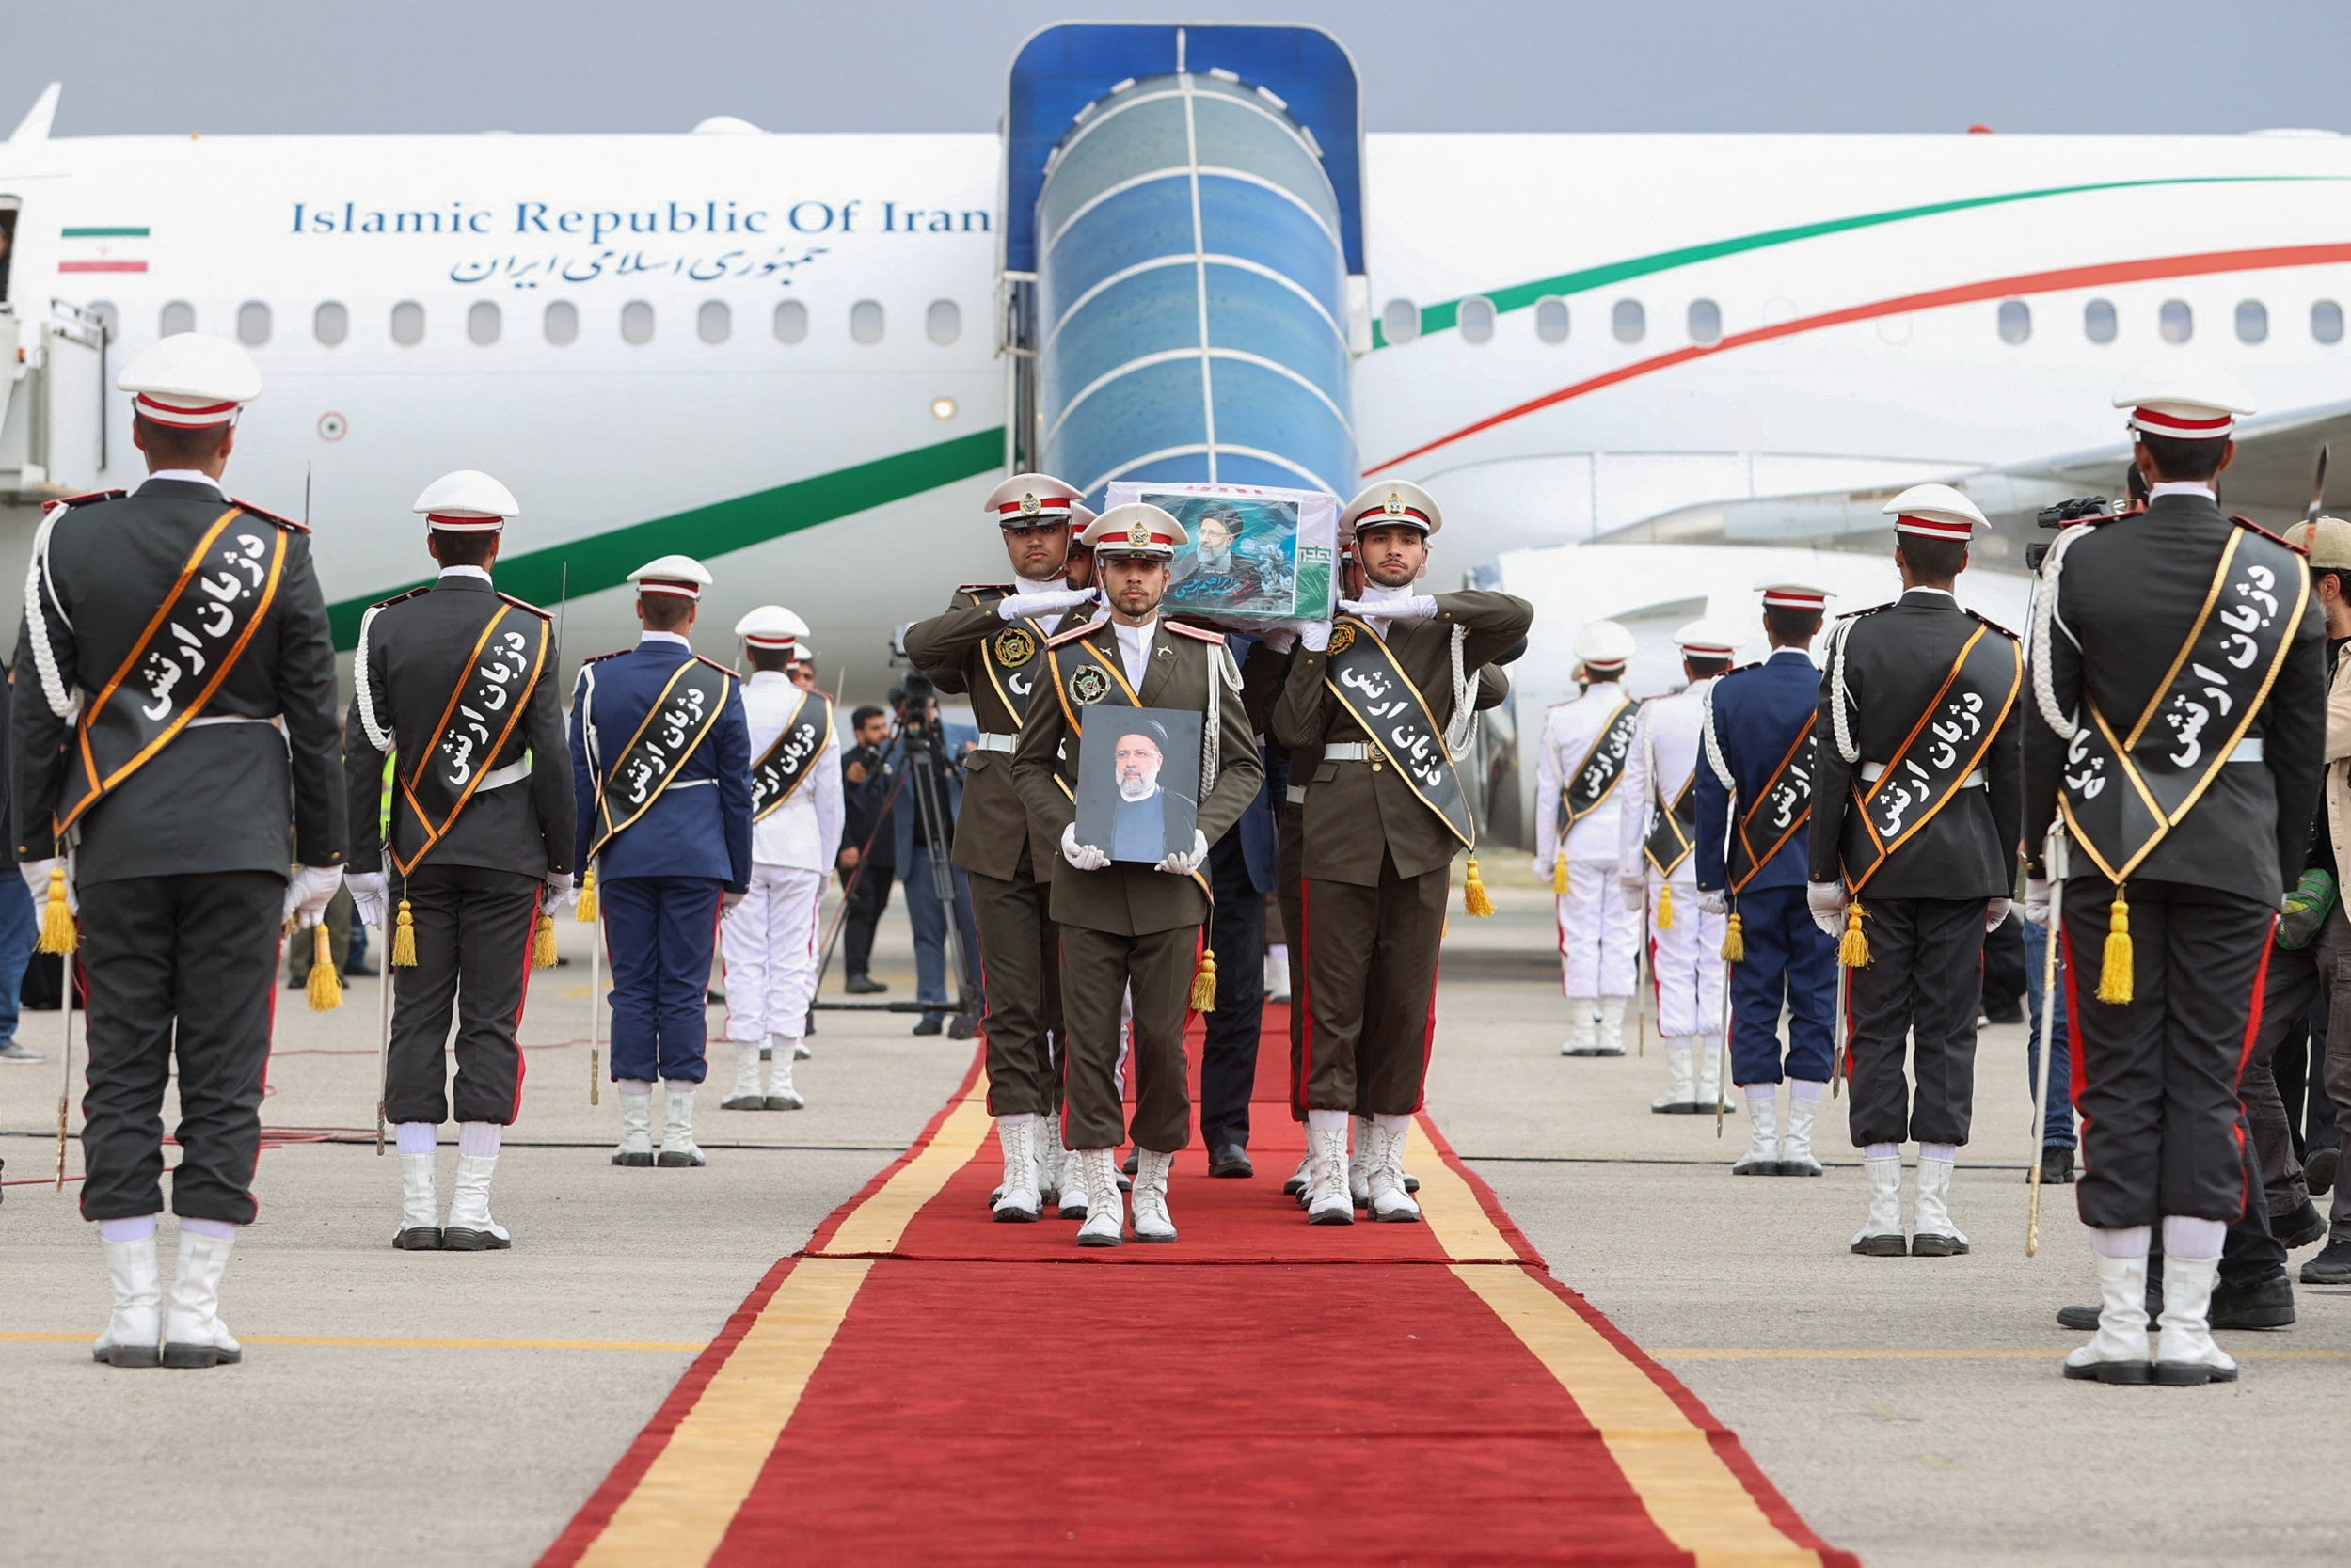 Soldiers carry the coffin of the late Iranian President Ebrahim Raisi at Mehrabad Airport in Tehran